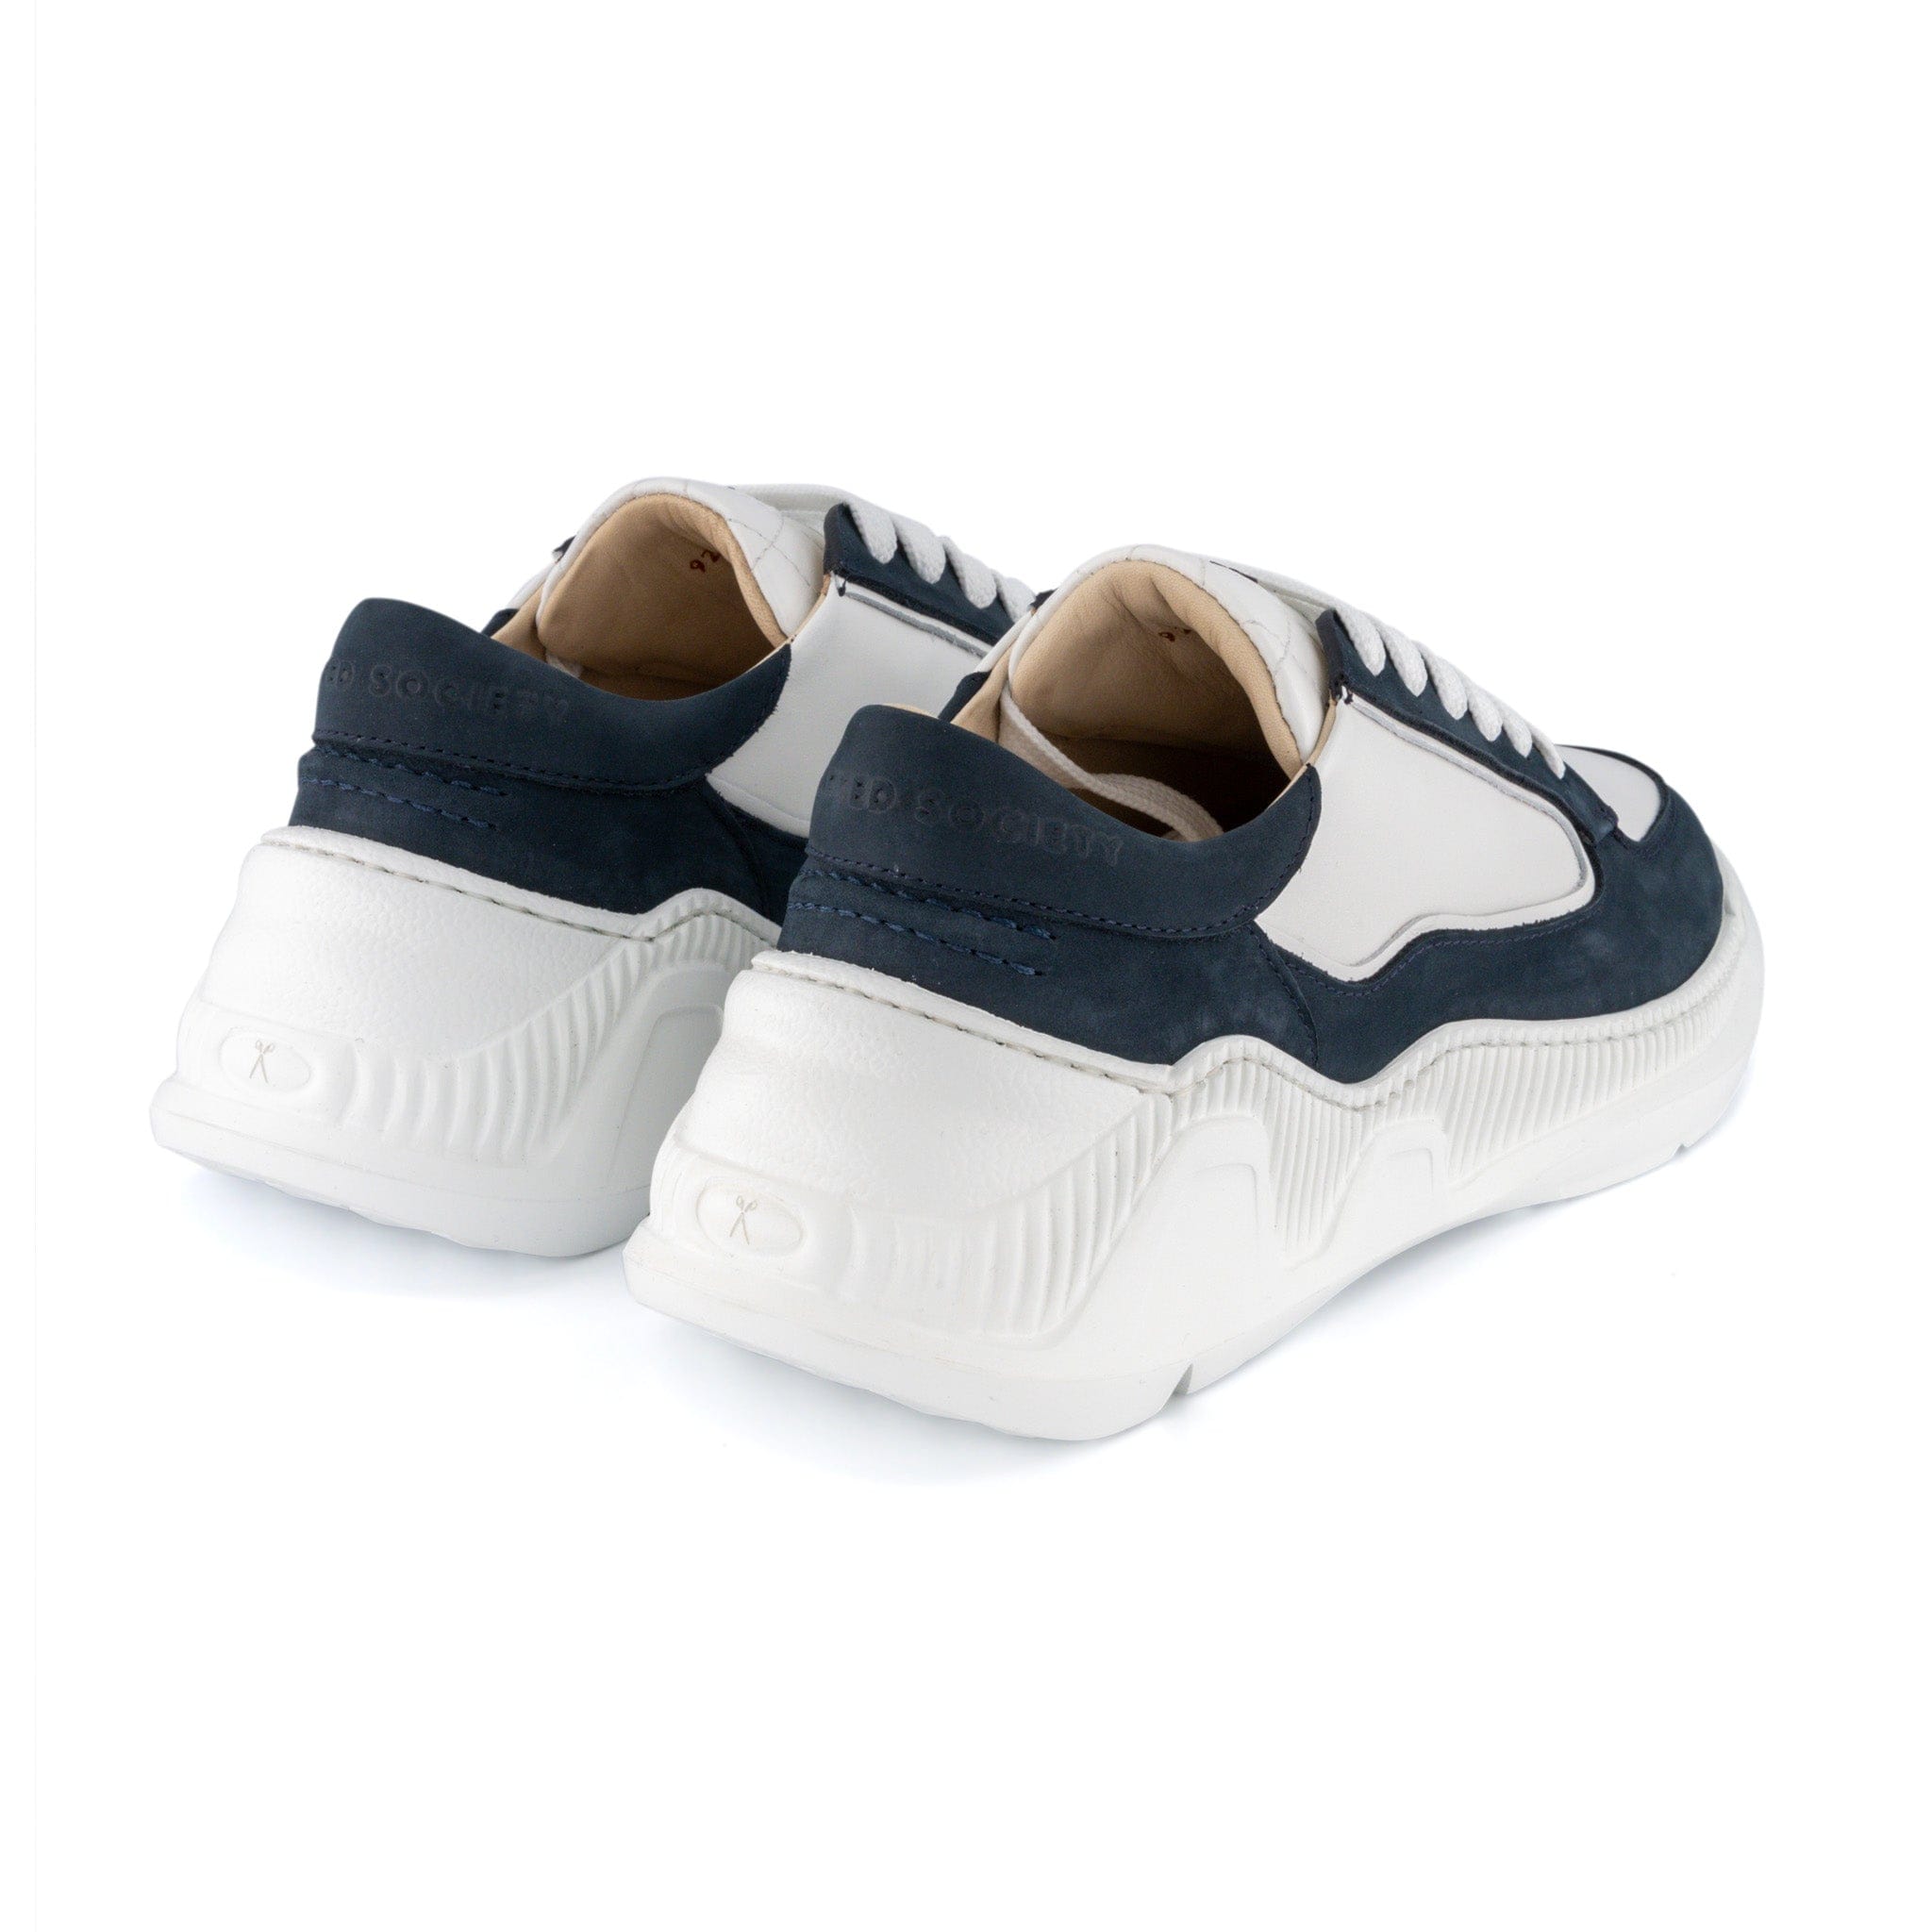 Nesto Low Top Italian Leather Sneaker | Navy and White | Made in Italy | Size 40